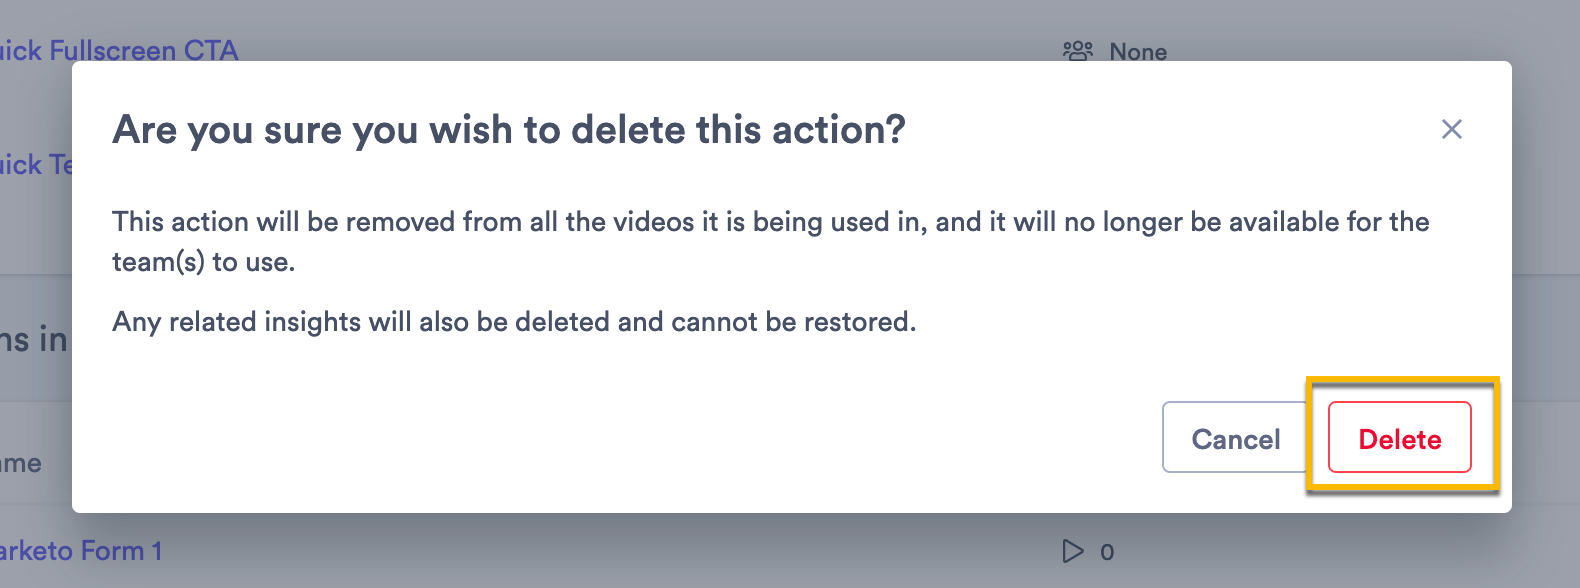 Deletion confirmation screen to delete Action